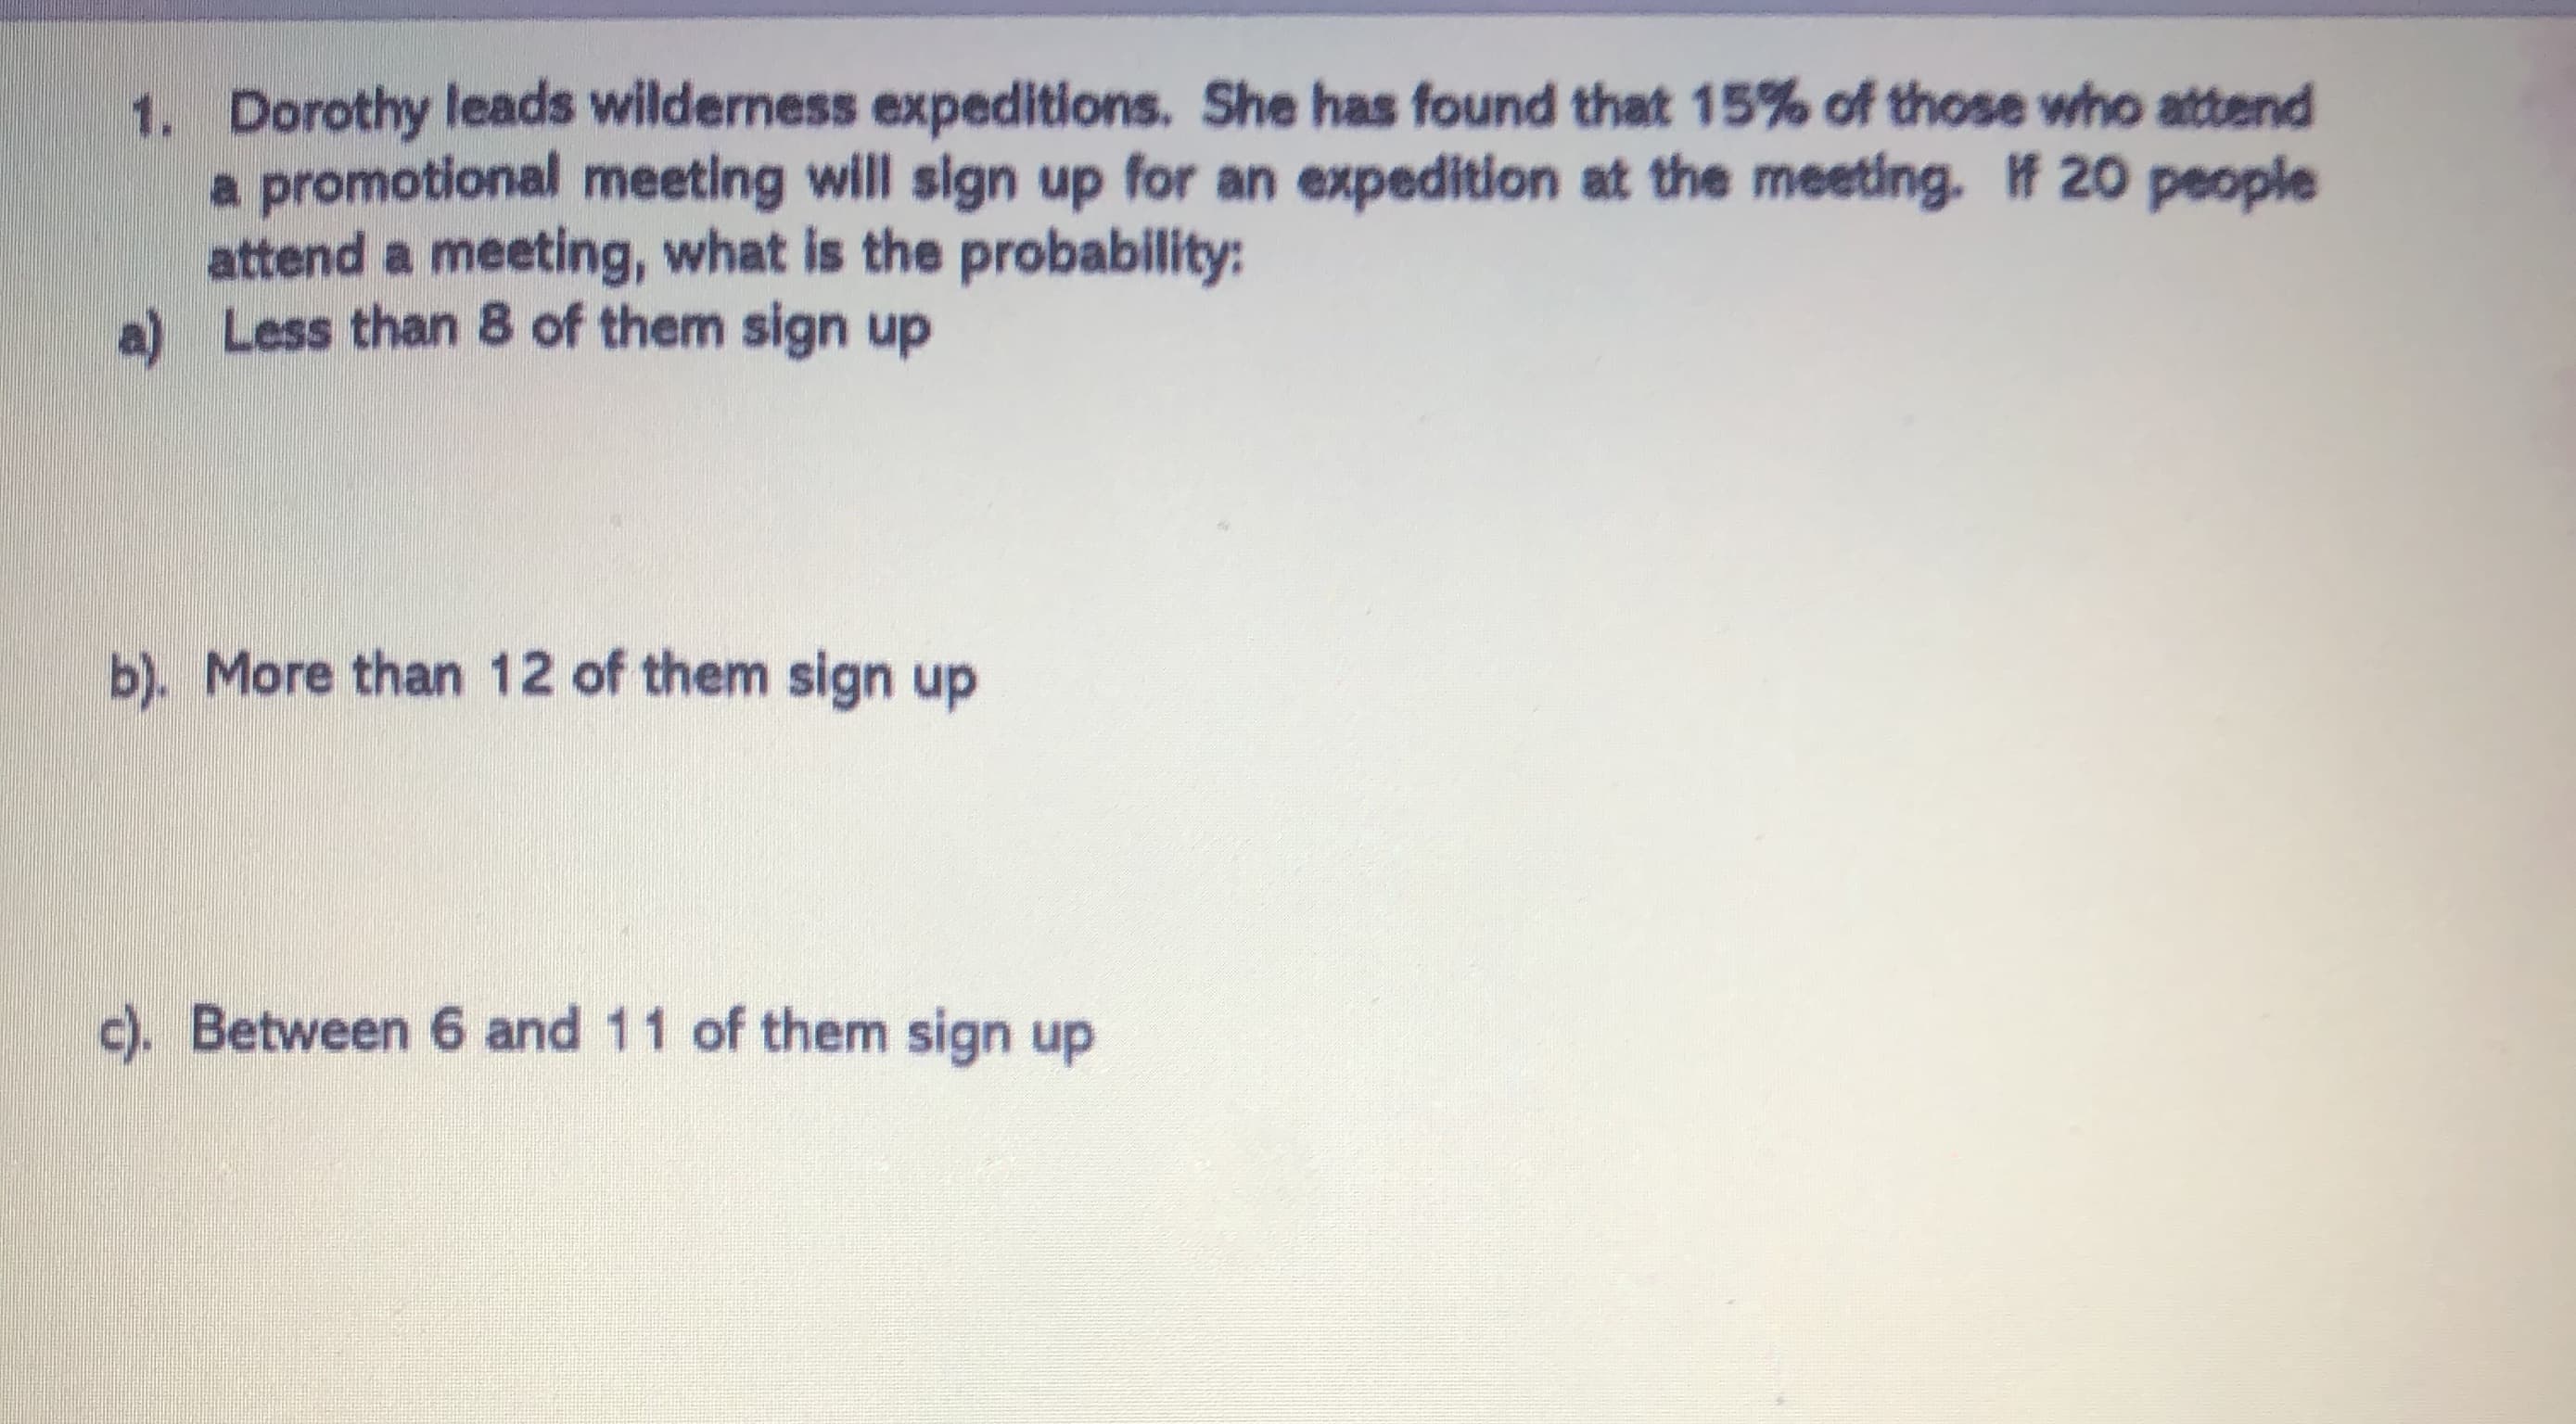 1. Dorothy leads wilderness expeditions. She has found that 15% of those who attend
a promotional meeting will sign up for an expedition at the meeting. # 20 people
attend a meeting, what is the probability:
a) Less than 8 of them sign up
b). More than 12 of them sign up
c). Between 6 and 11 of them sign up
